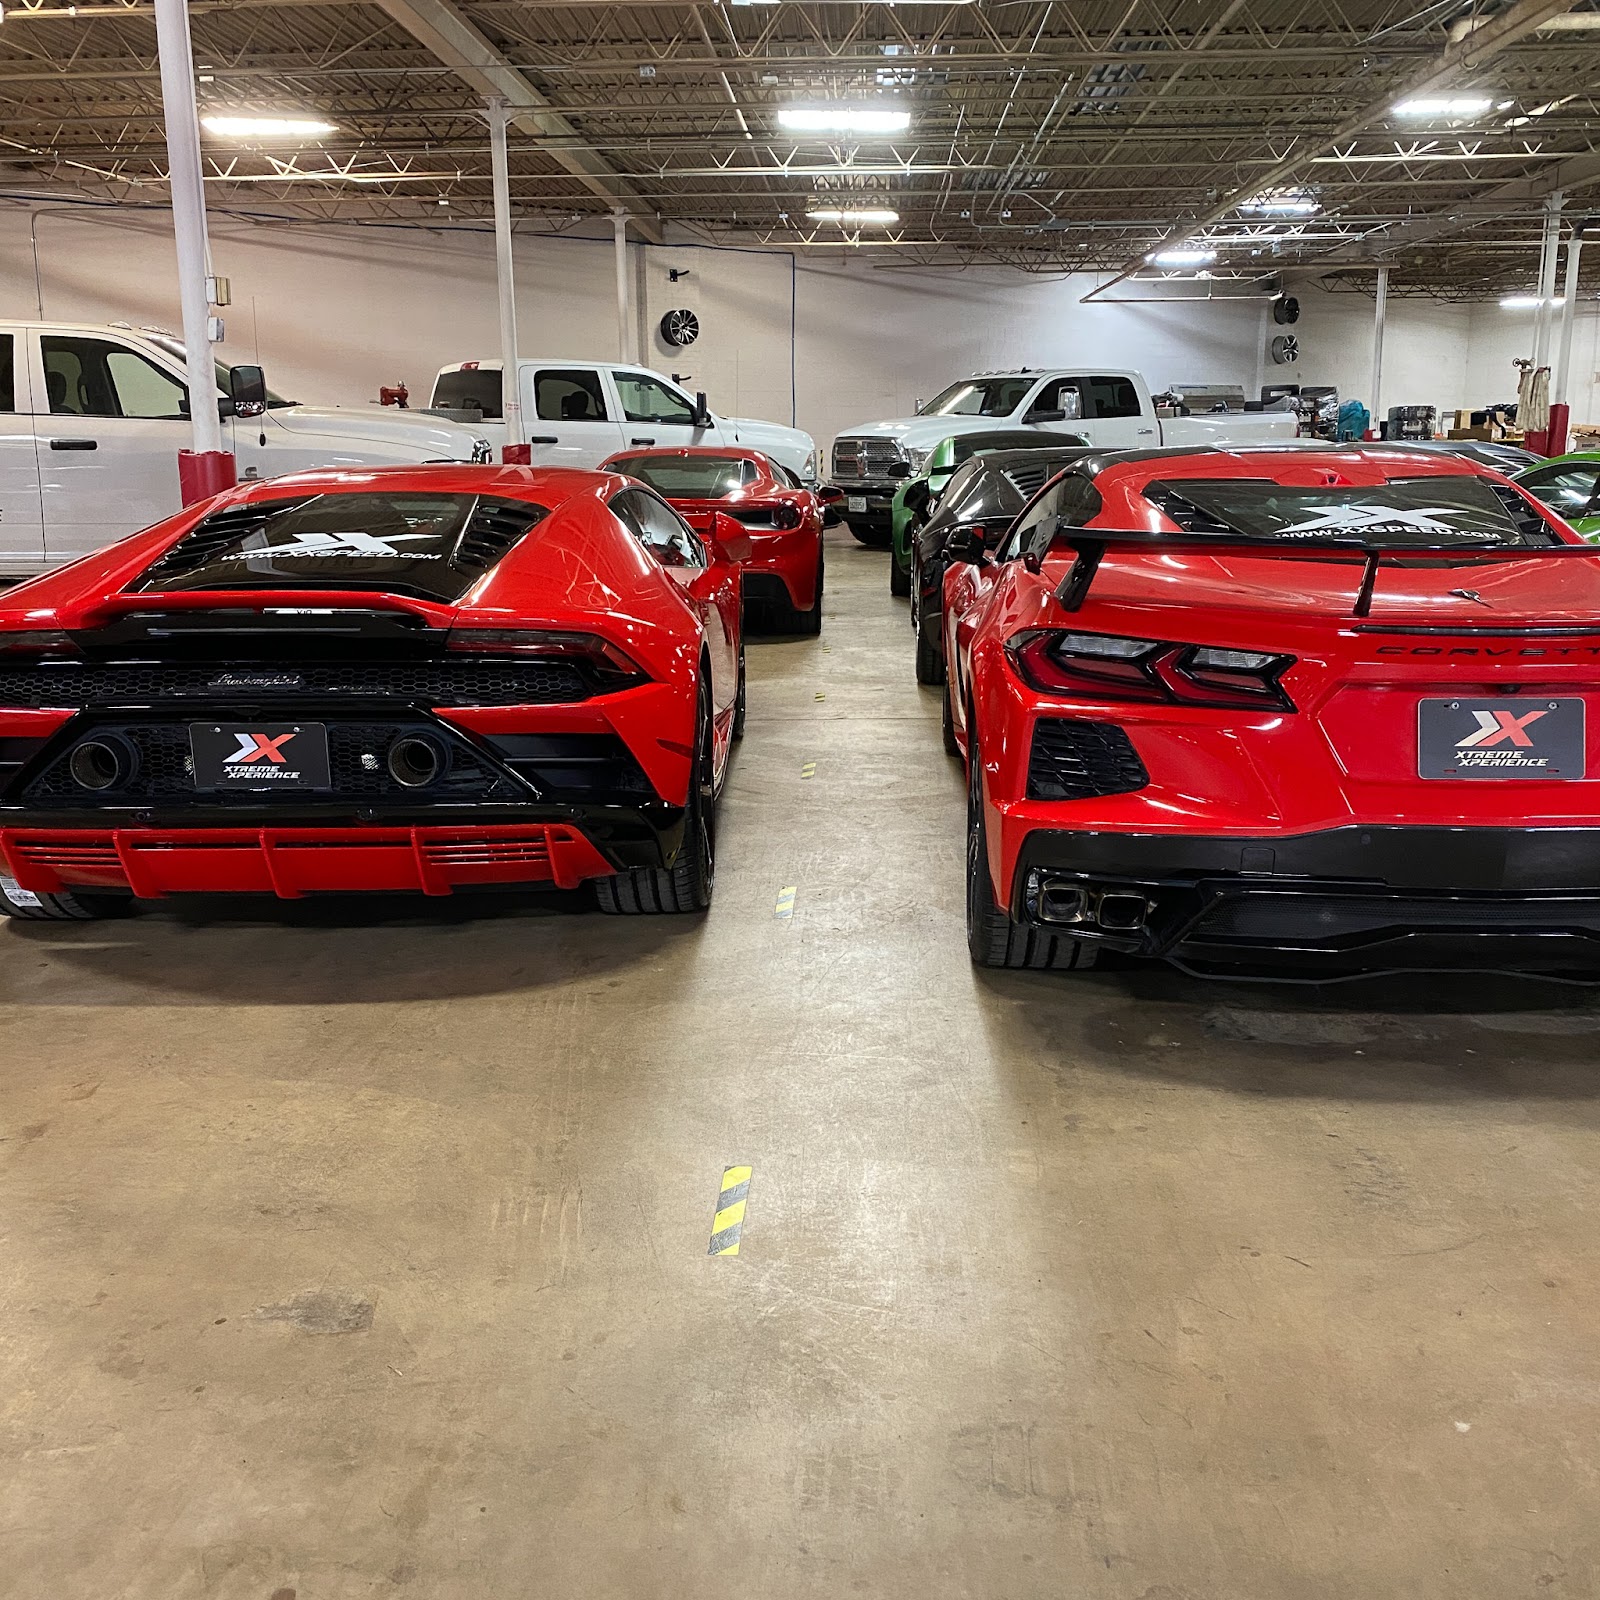 A red Corvette C8 and red Lamborghini Huracan EVO, both 2020 model years sit in the Xtreme Xperience garage bright and shiny.